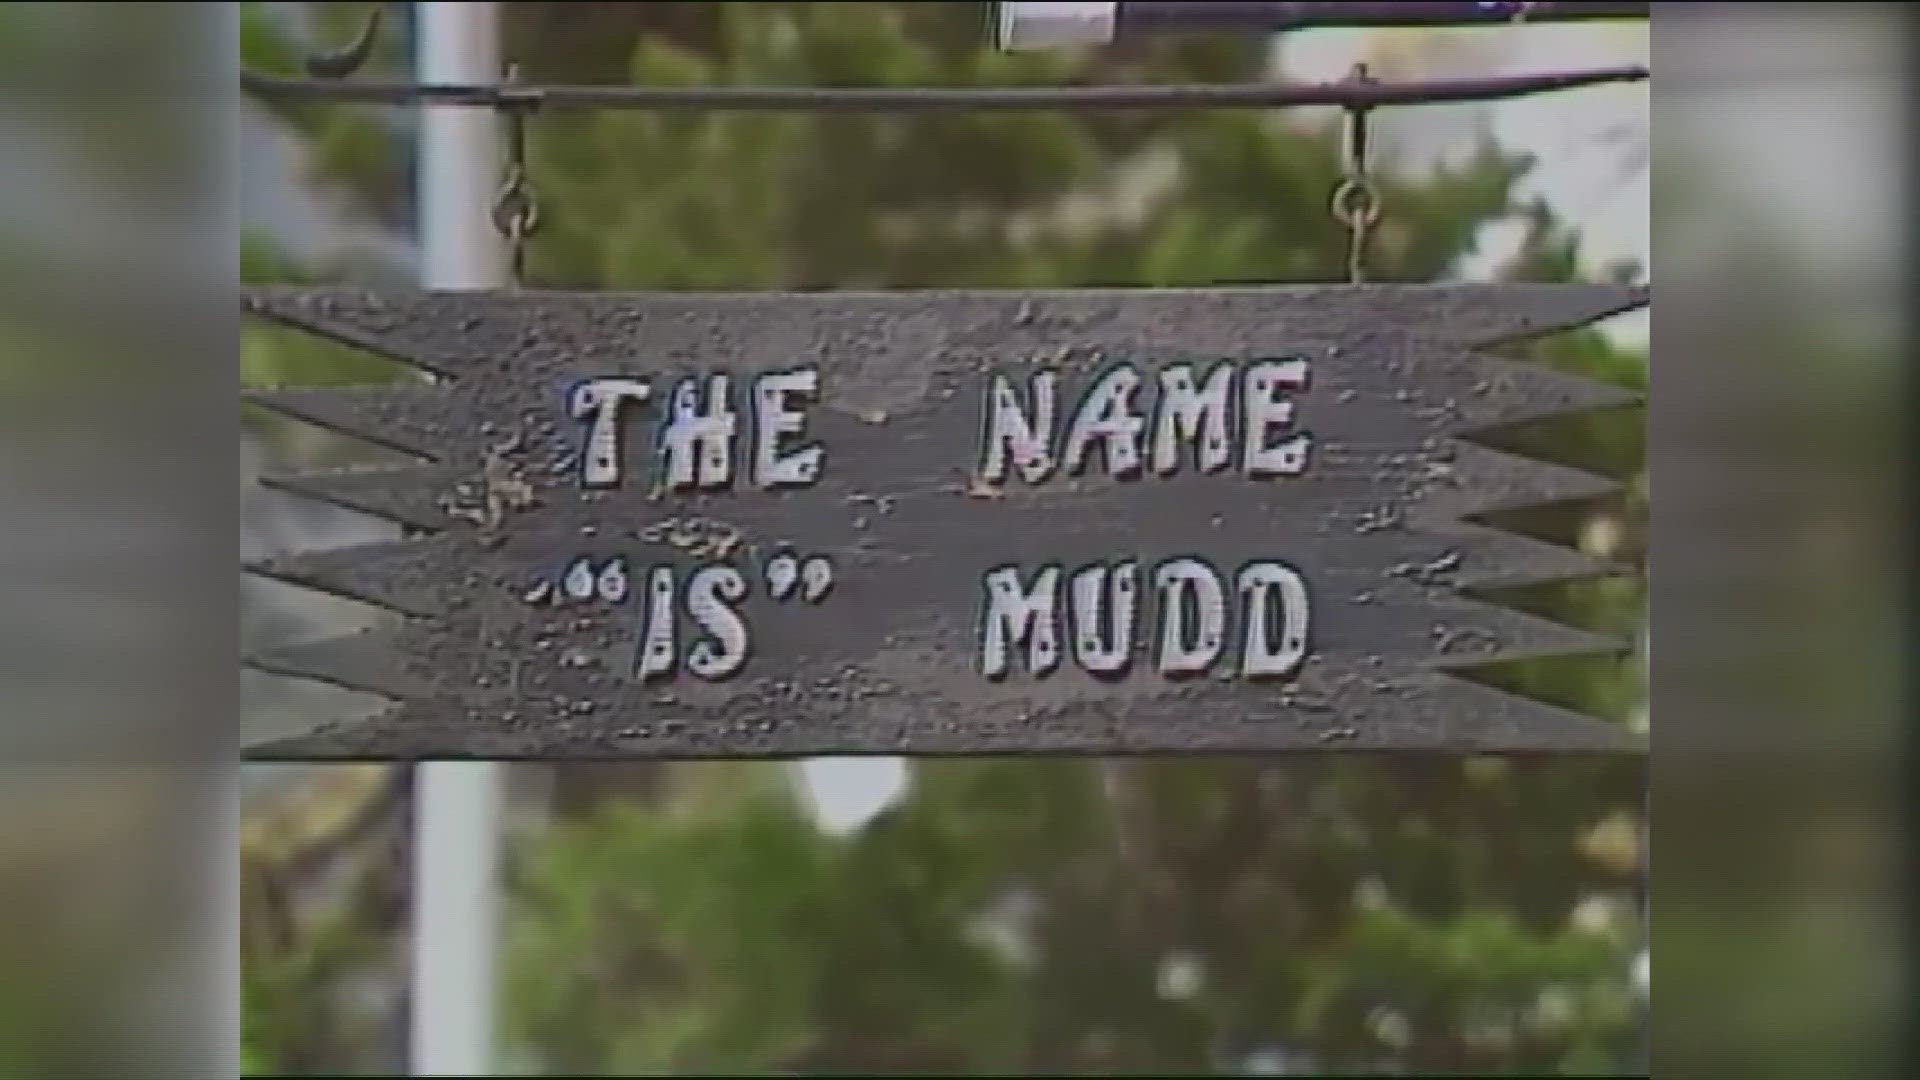 In 1987, a man in Bowling Green by the name of Wally Mudd, a distant relative of the doctor who treated John Wilkes Booth, spoke to our Dick Berry about the name.